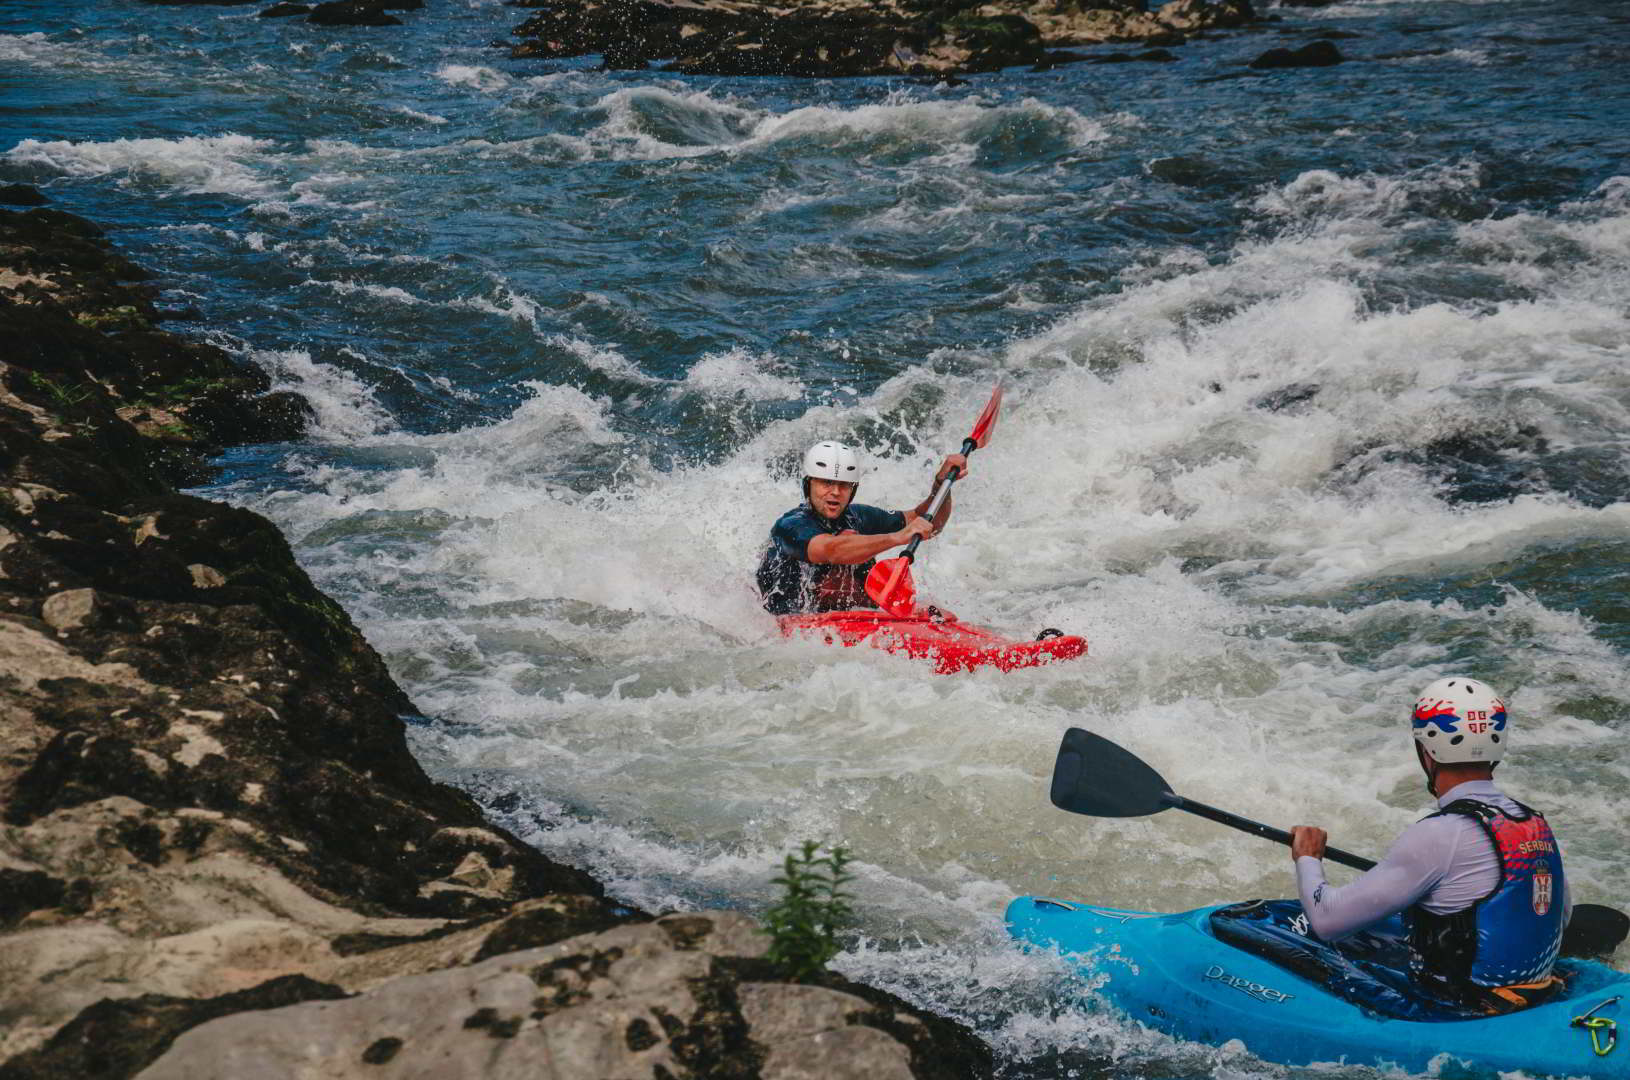 Two men are kayaking on the river in the rapids